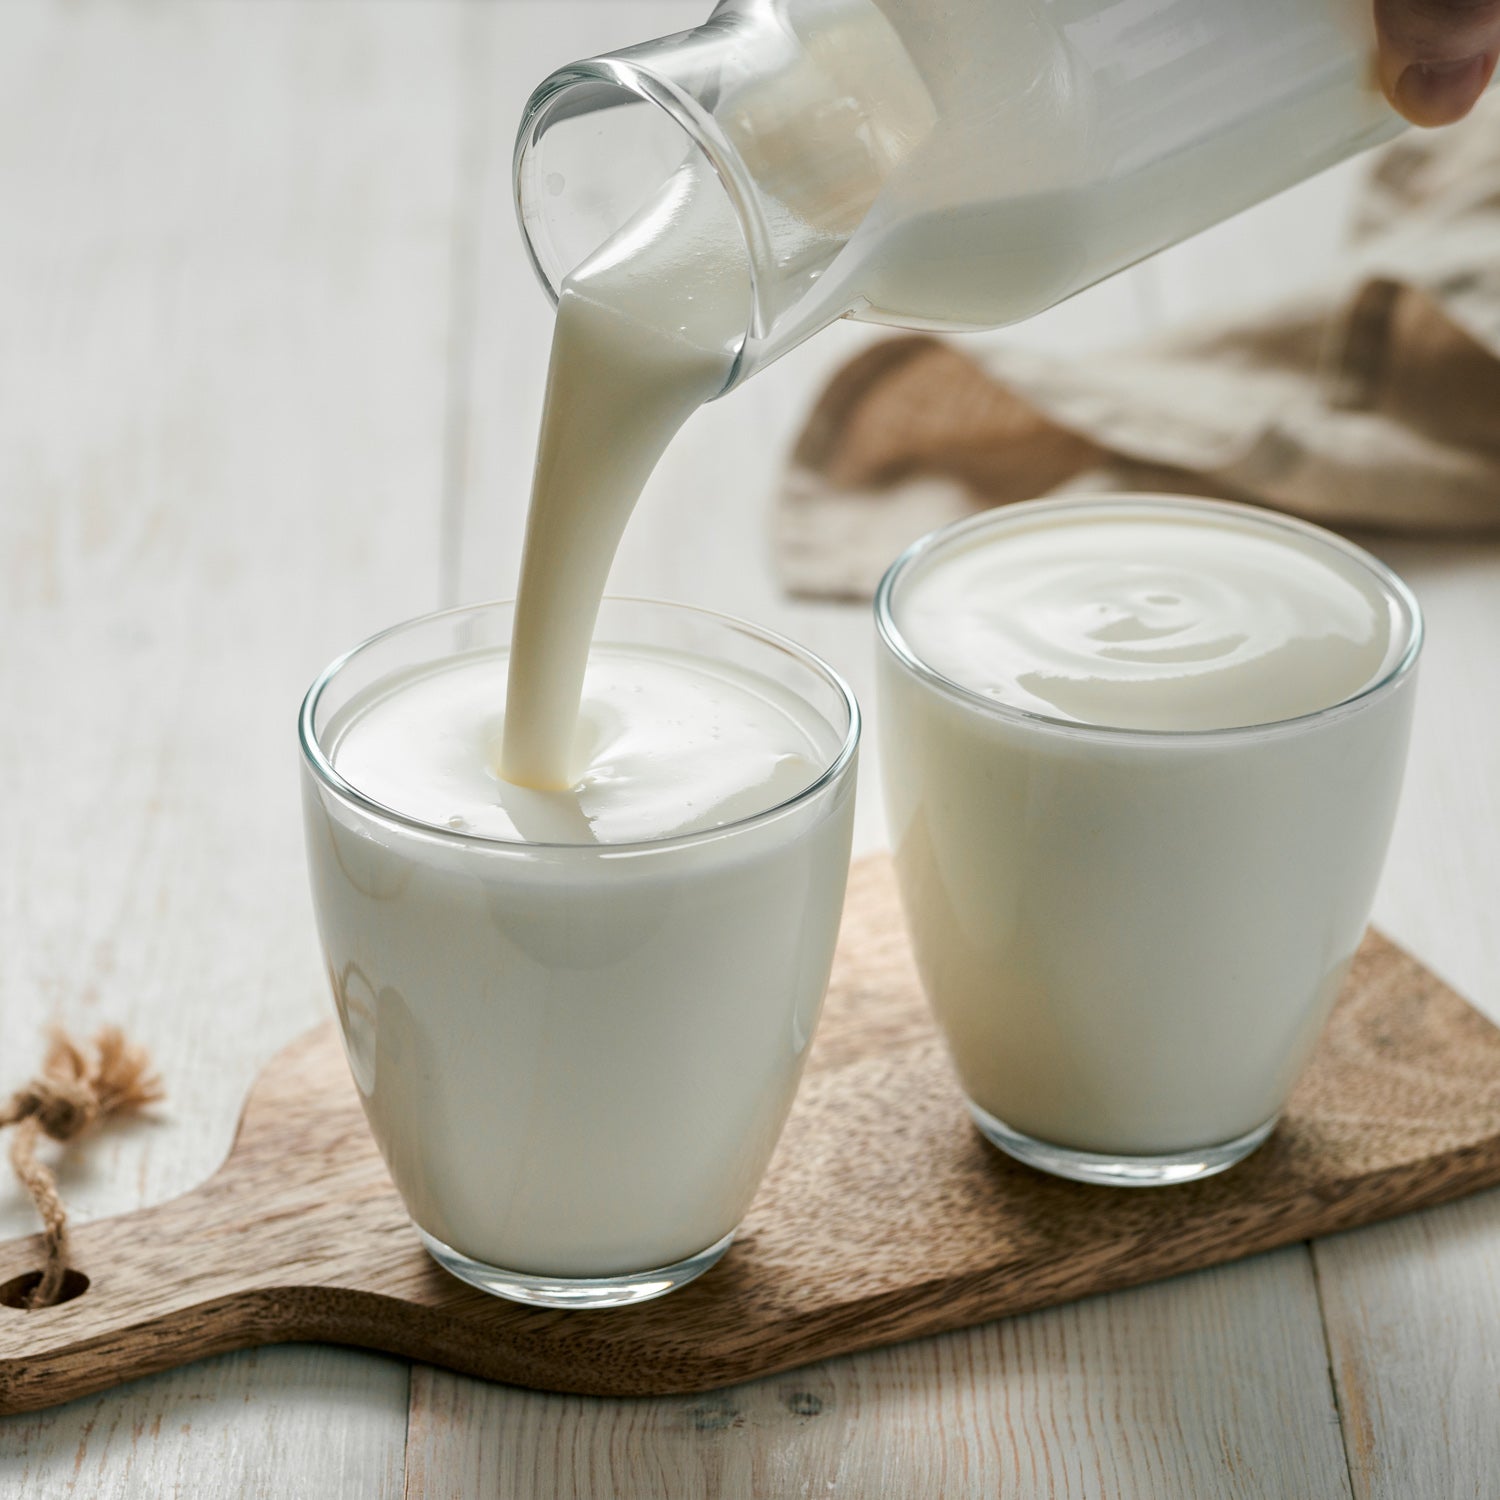 5 Health Benefits Of Adding Kefir To Your Diet